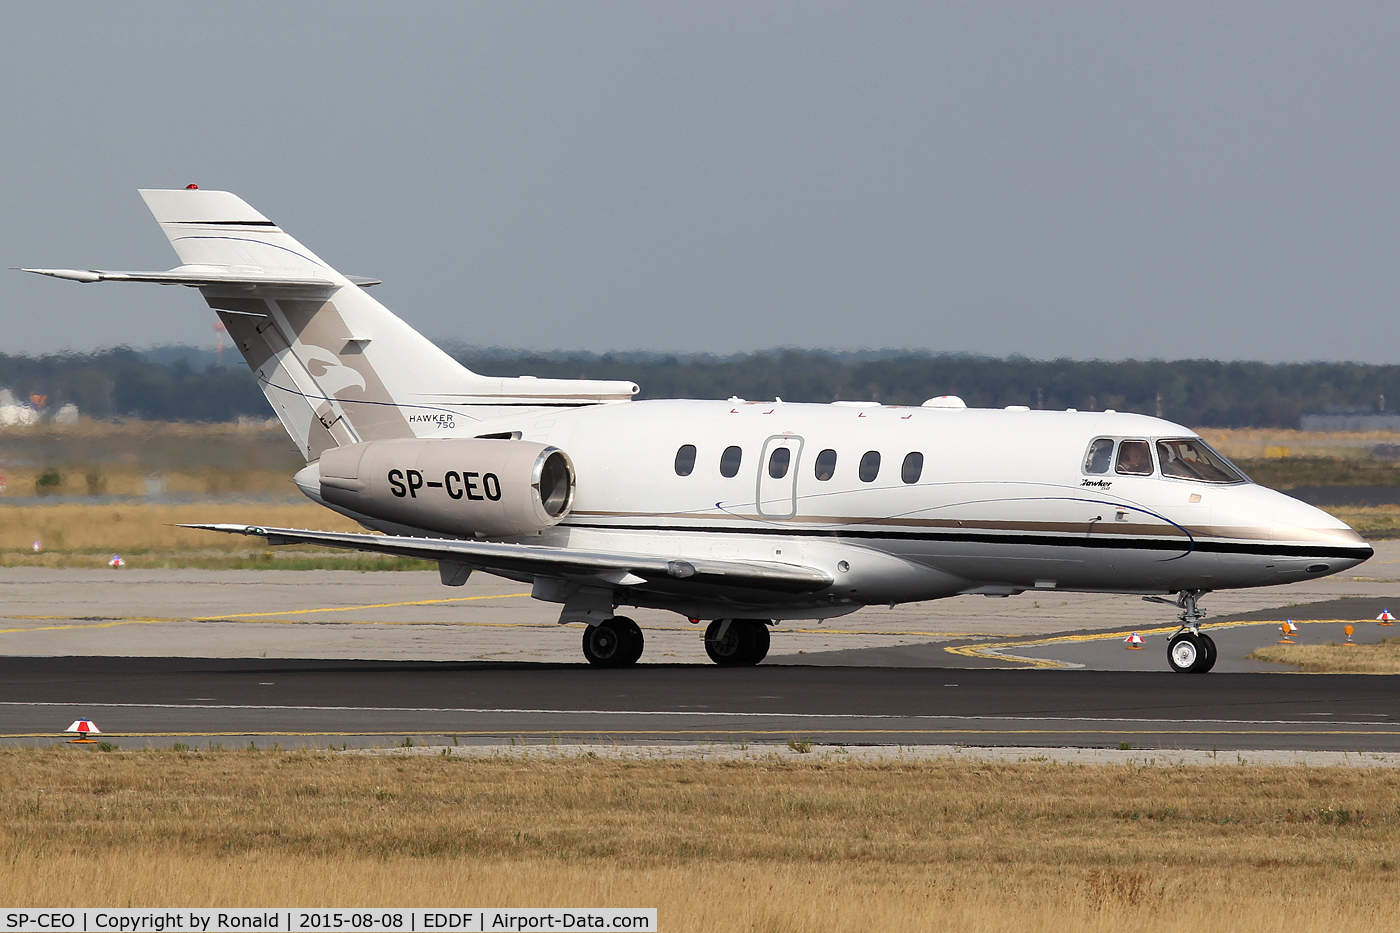 SP-CEO, 2011 Hawker Beechcraft 750 C/N HB-70, at fra